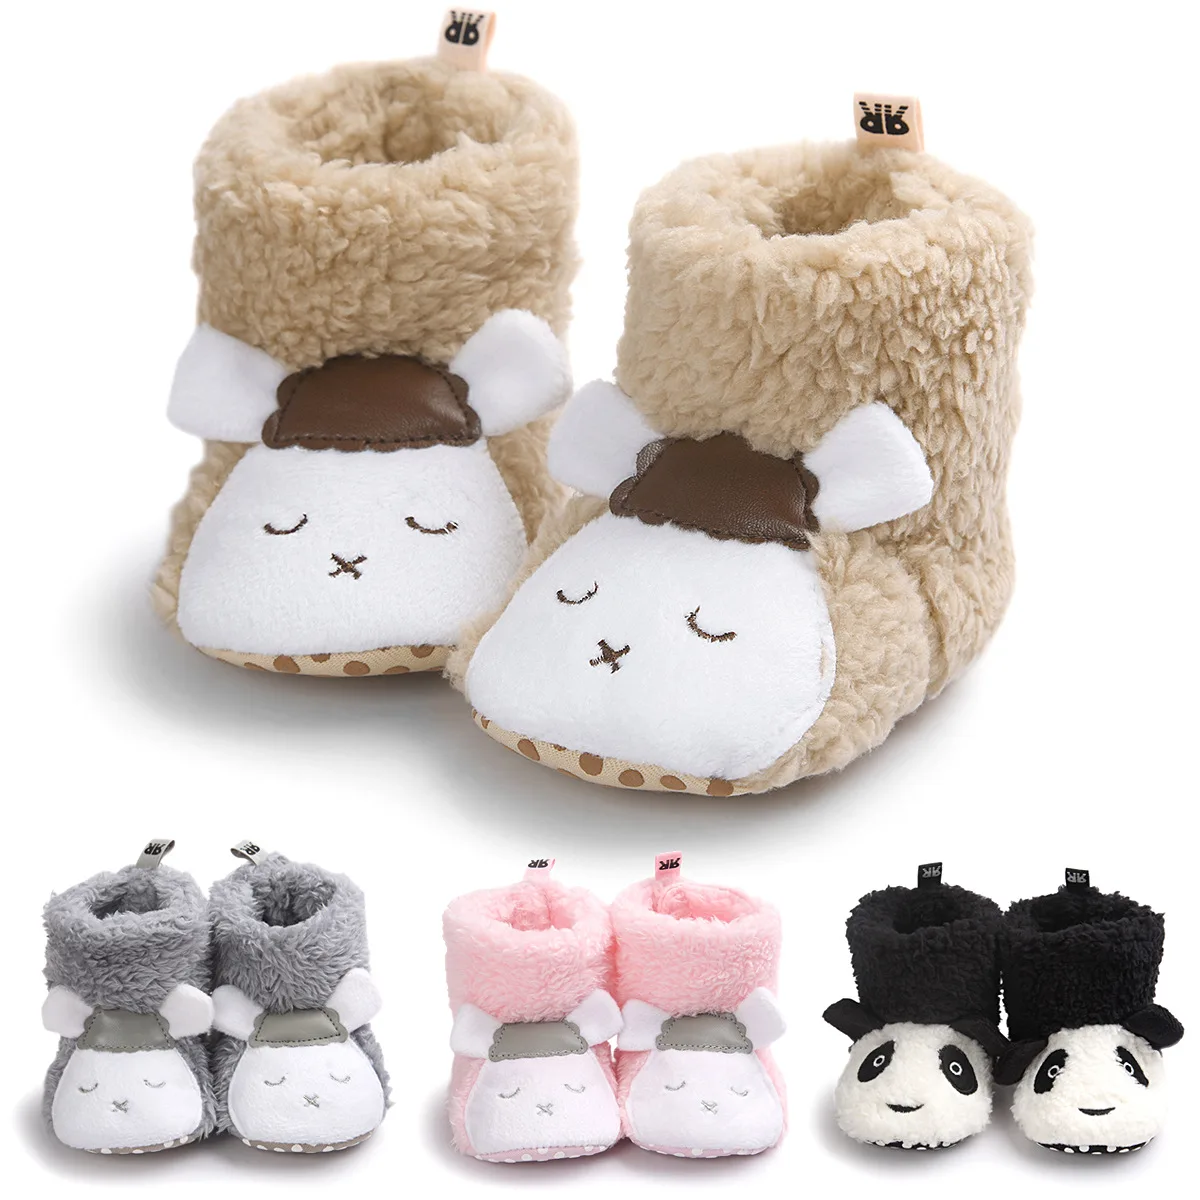 

Unisex Baby Shoes For Boy And Girls Newborn Bootie Winter Warm Infant Toddler Crib Indoor Shoes Zapatos Bebe First Walk TS141